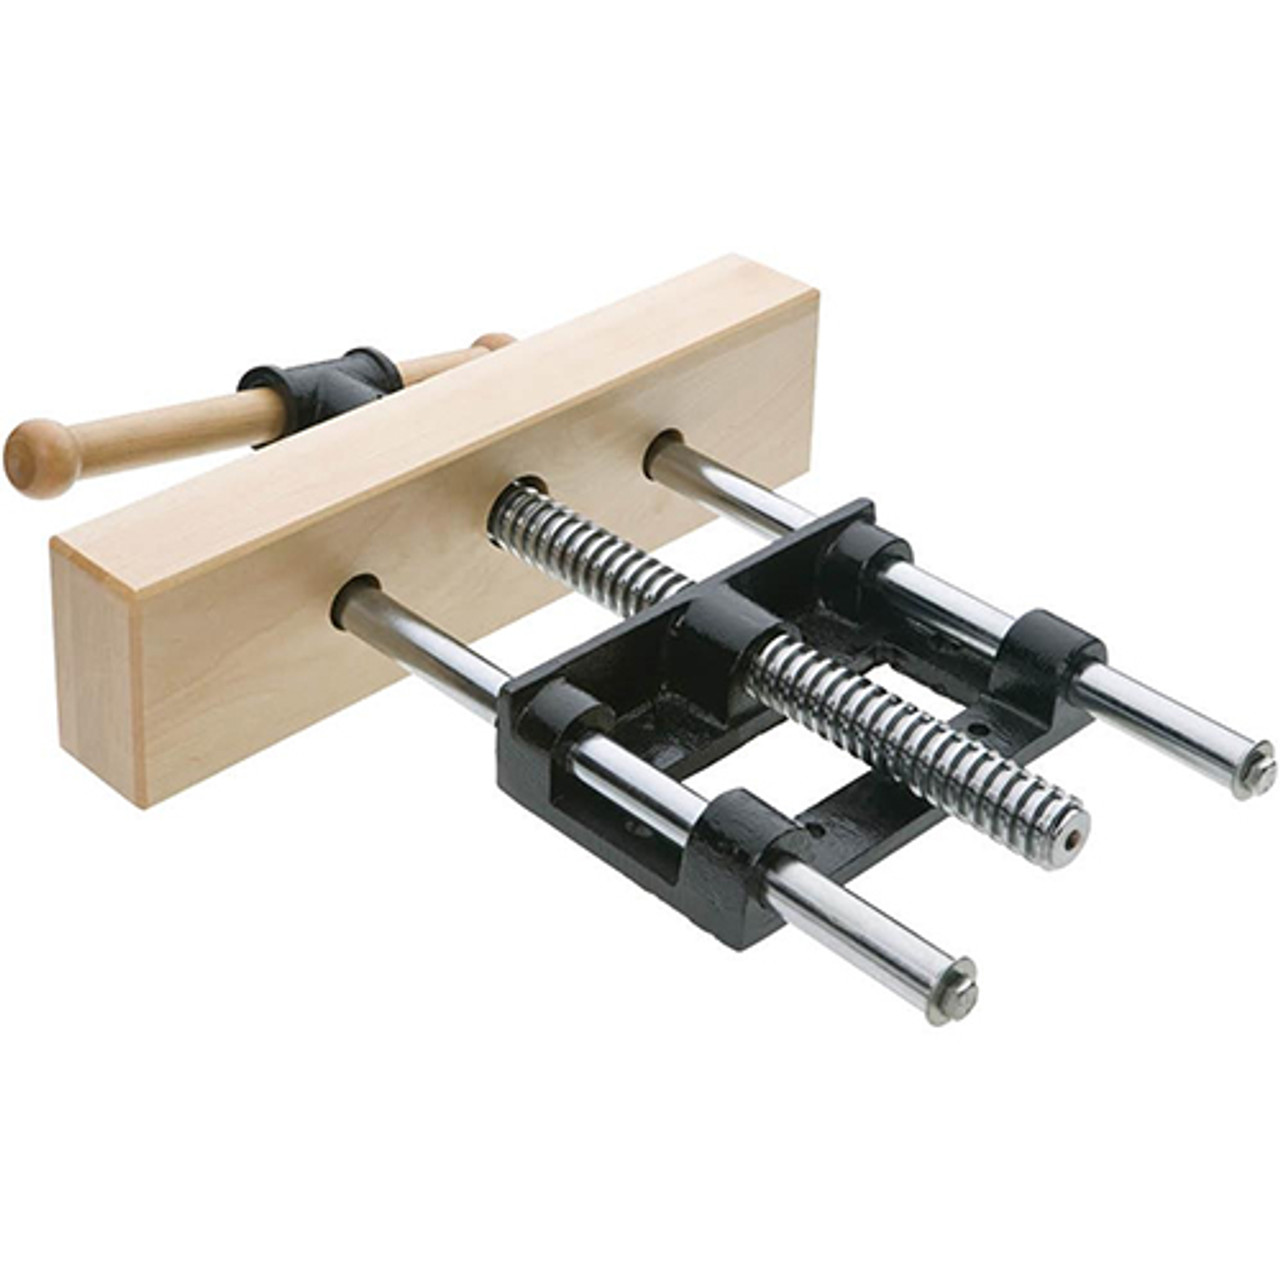 Cabinet Makers Front Vise